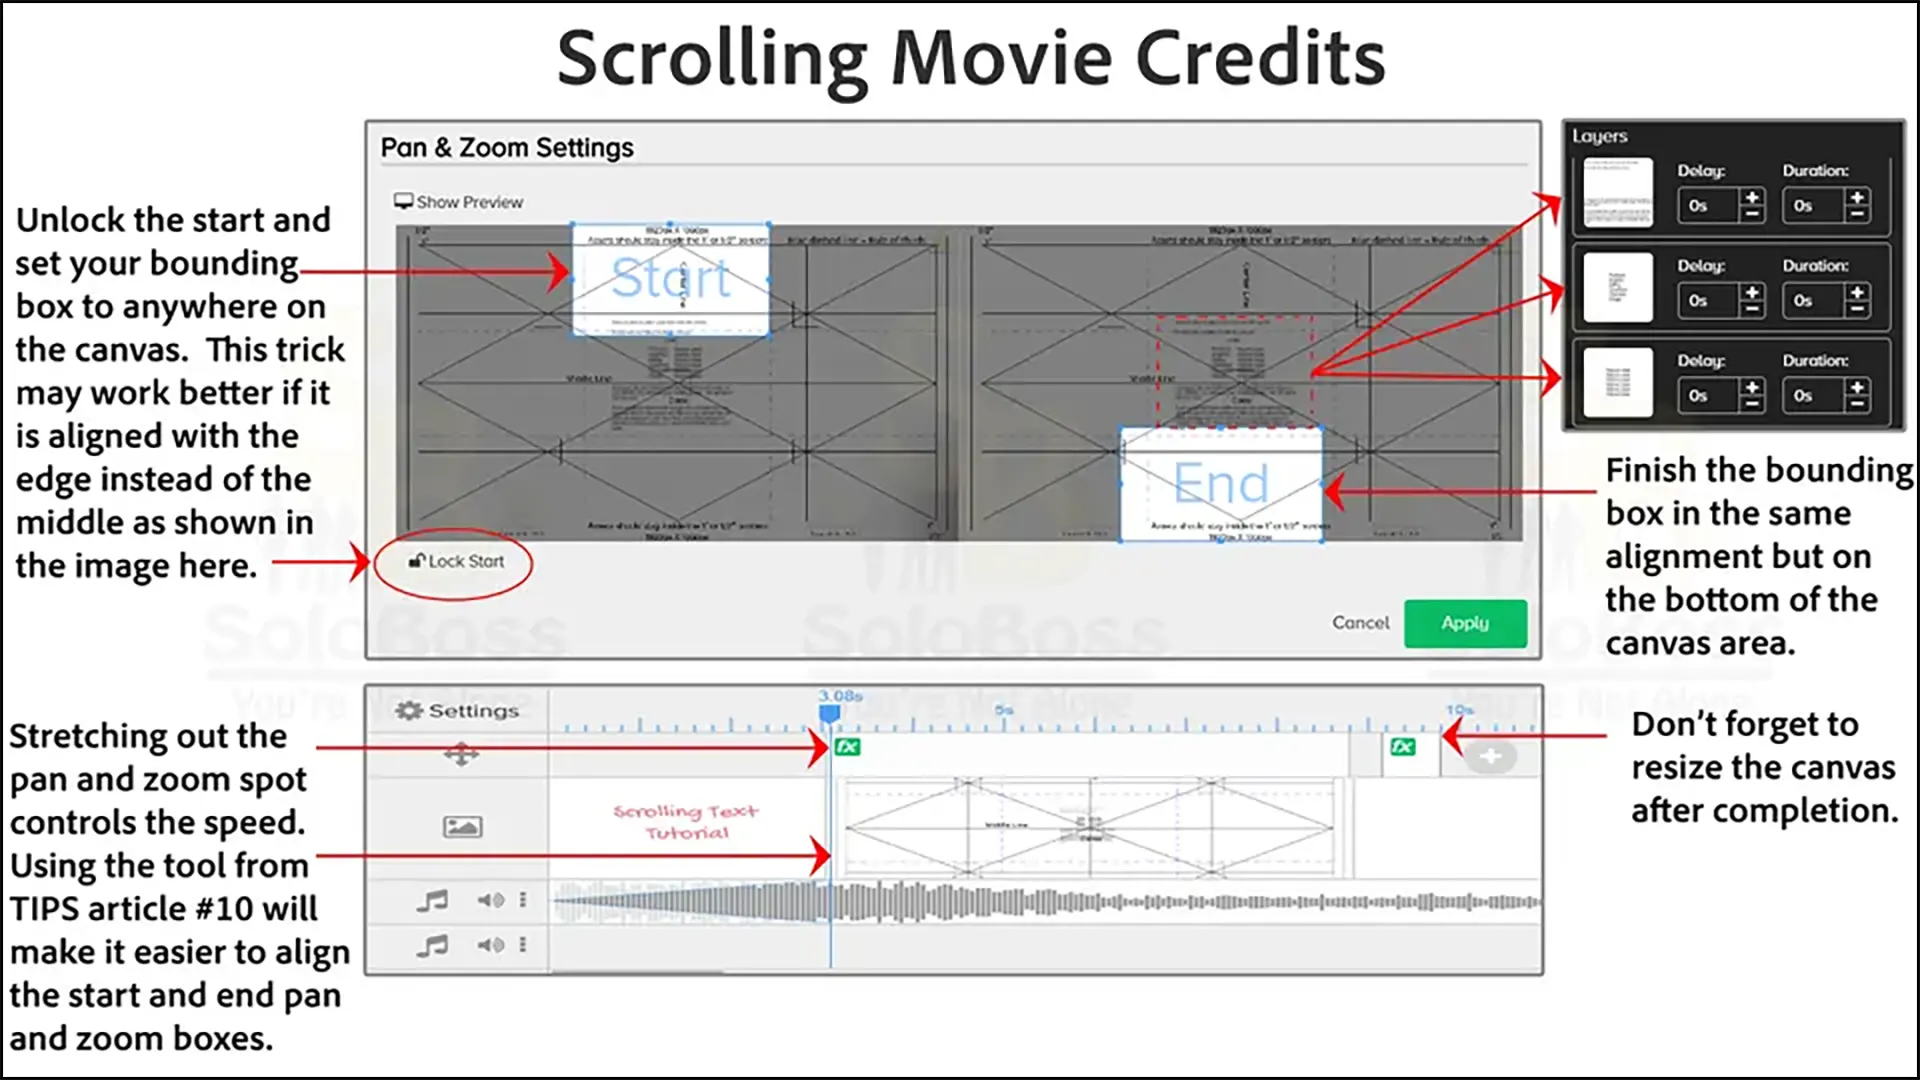 Displaying settings for how to create scrolling movie credits in Doodly.